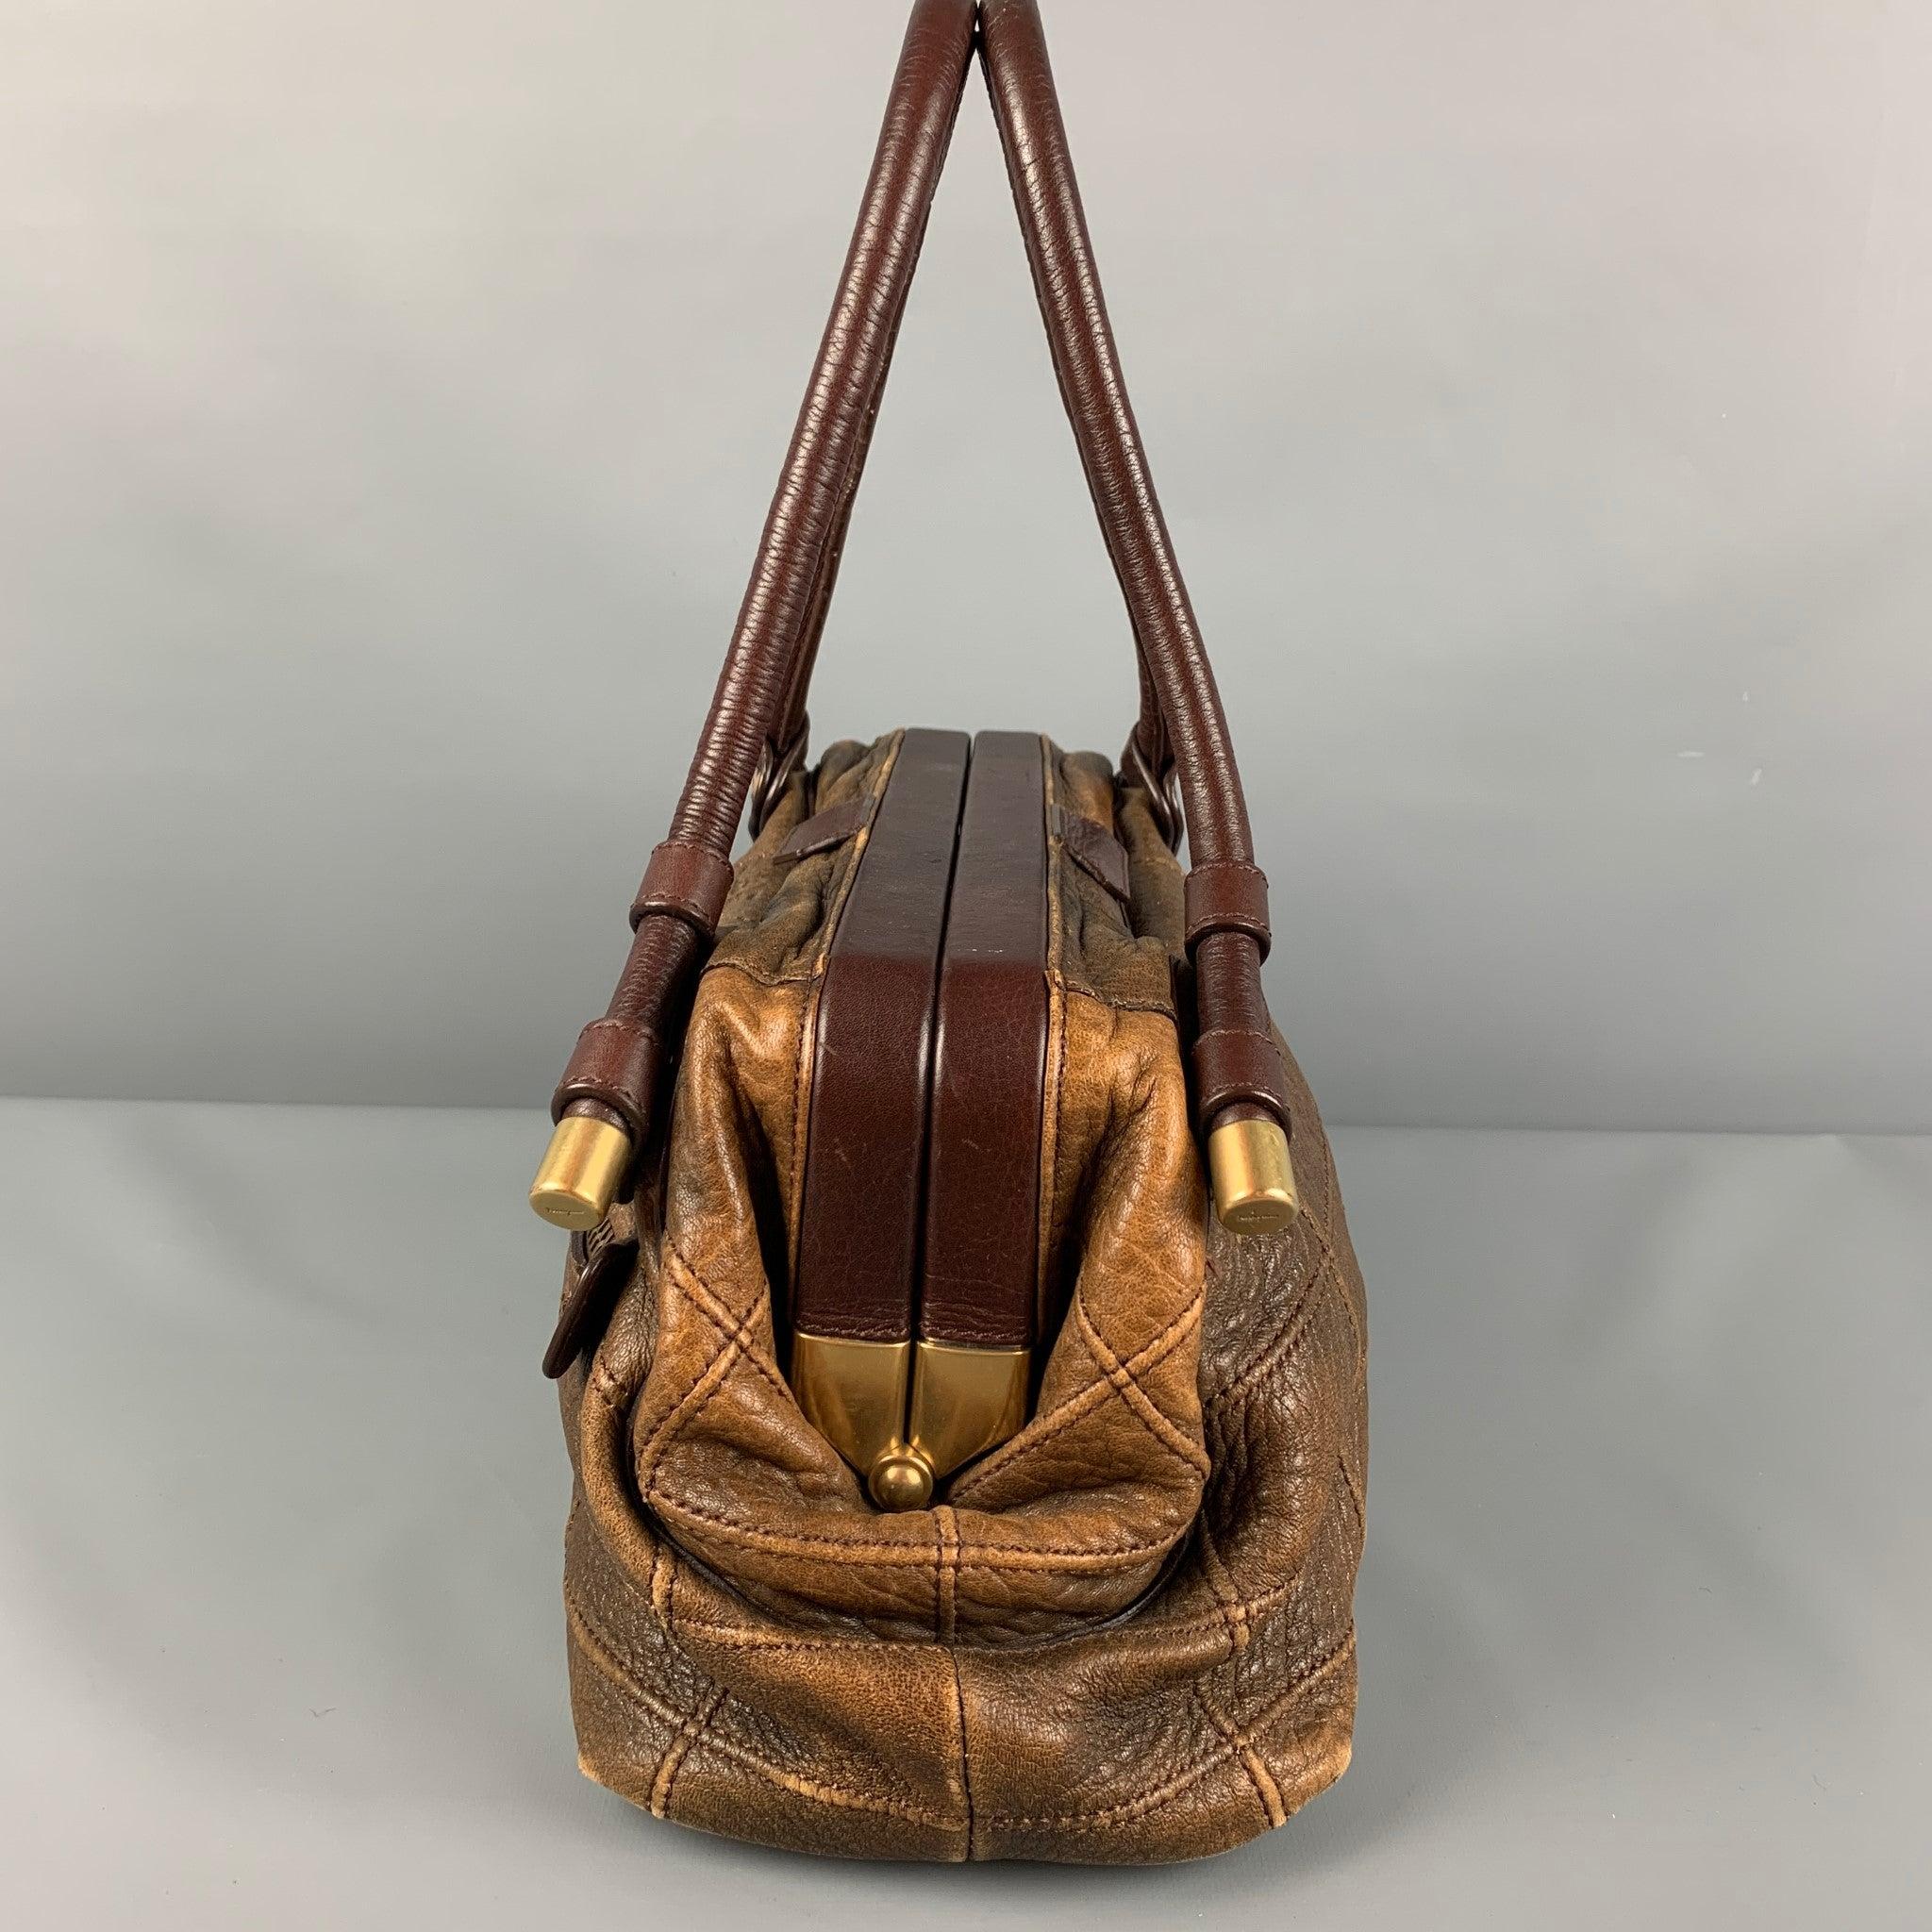 SALVATORE FERRAGAMO handbag comes in a brown quilted leather featuring top handles, gold tone hardware, fringe charm detail, inner pocket, and a magnetic closure. Made in Italy.
Good
Pre-Owned Condition. Moderate wear. As-Is.  

Marked:   FG216831